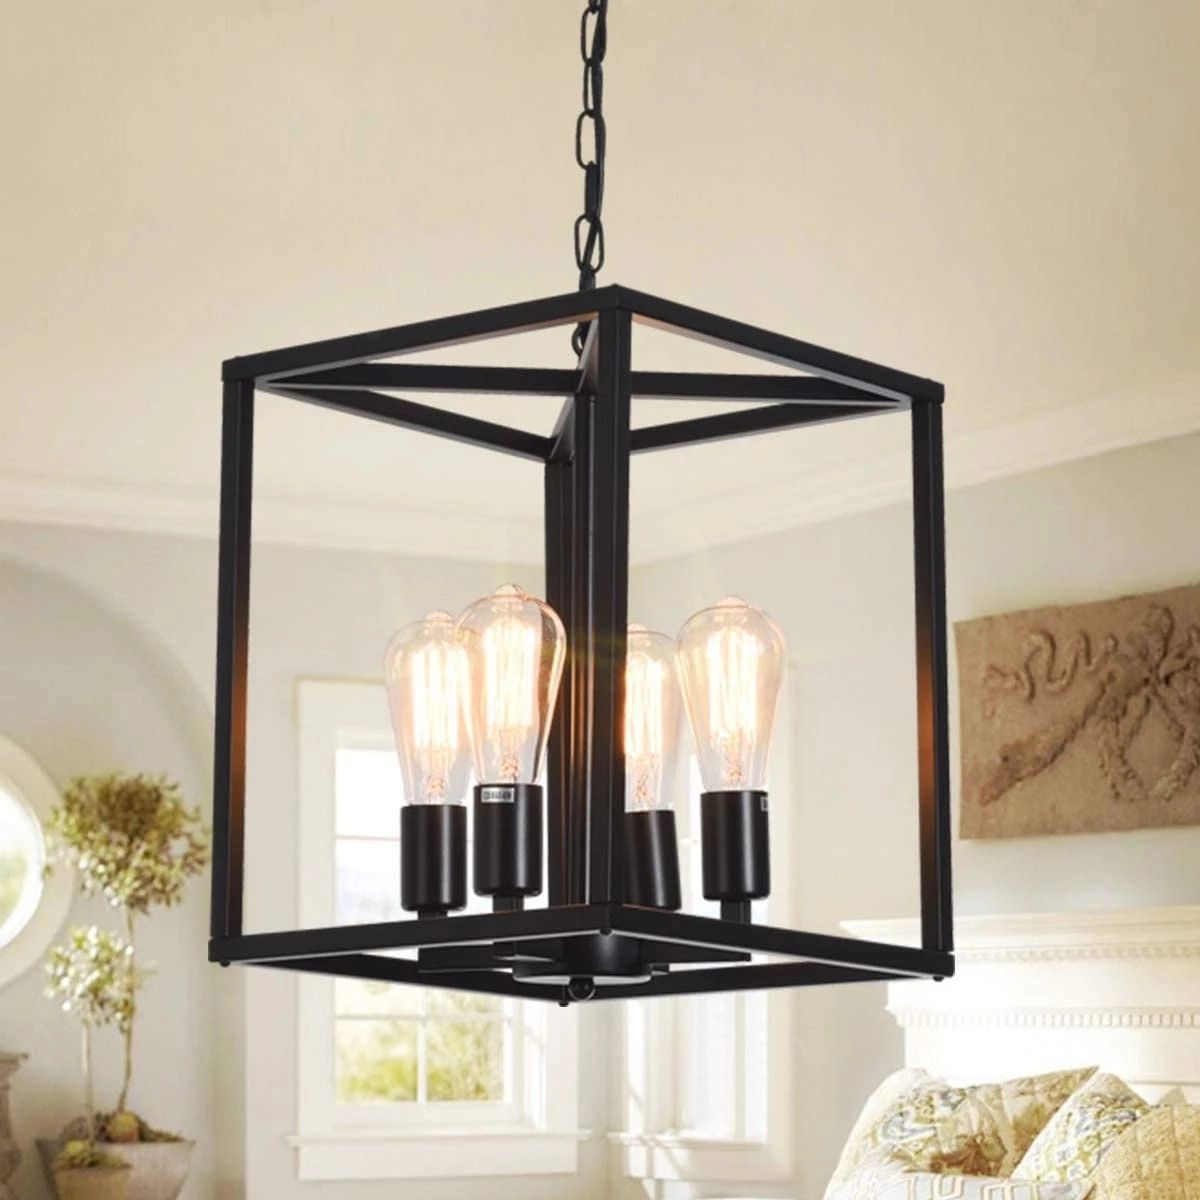 Industrial Metal Lantern Chandeliers 4 Light Adjustable Height Farmhouse  Ceiling Rustic Gold Kitchen Hanging Lighting Fixture – Pendant Lights –  Aliexpress Within Steel Lantern Chandeliers (View 5 of 15)